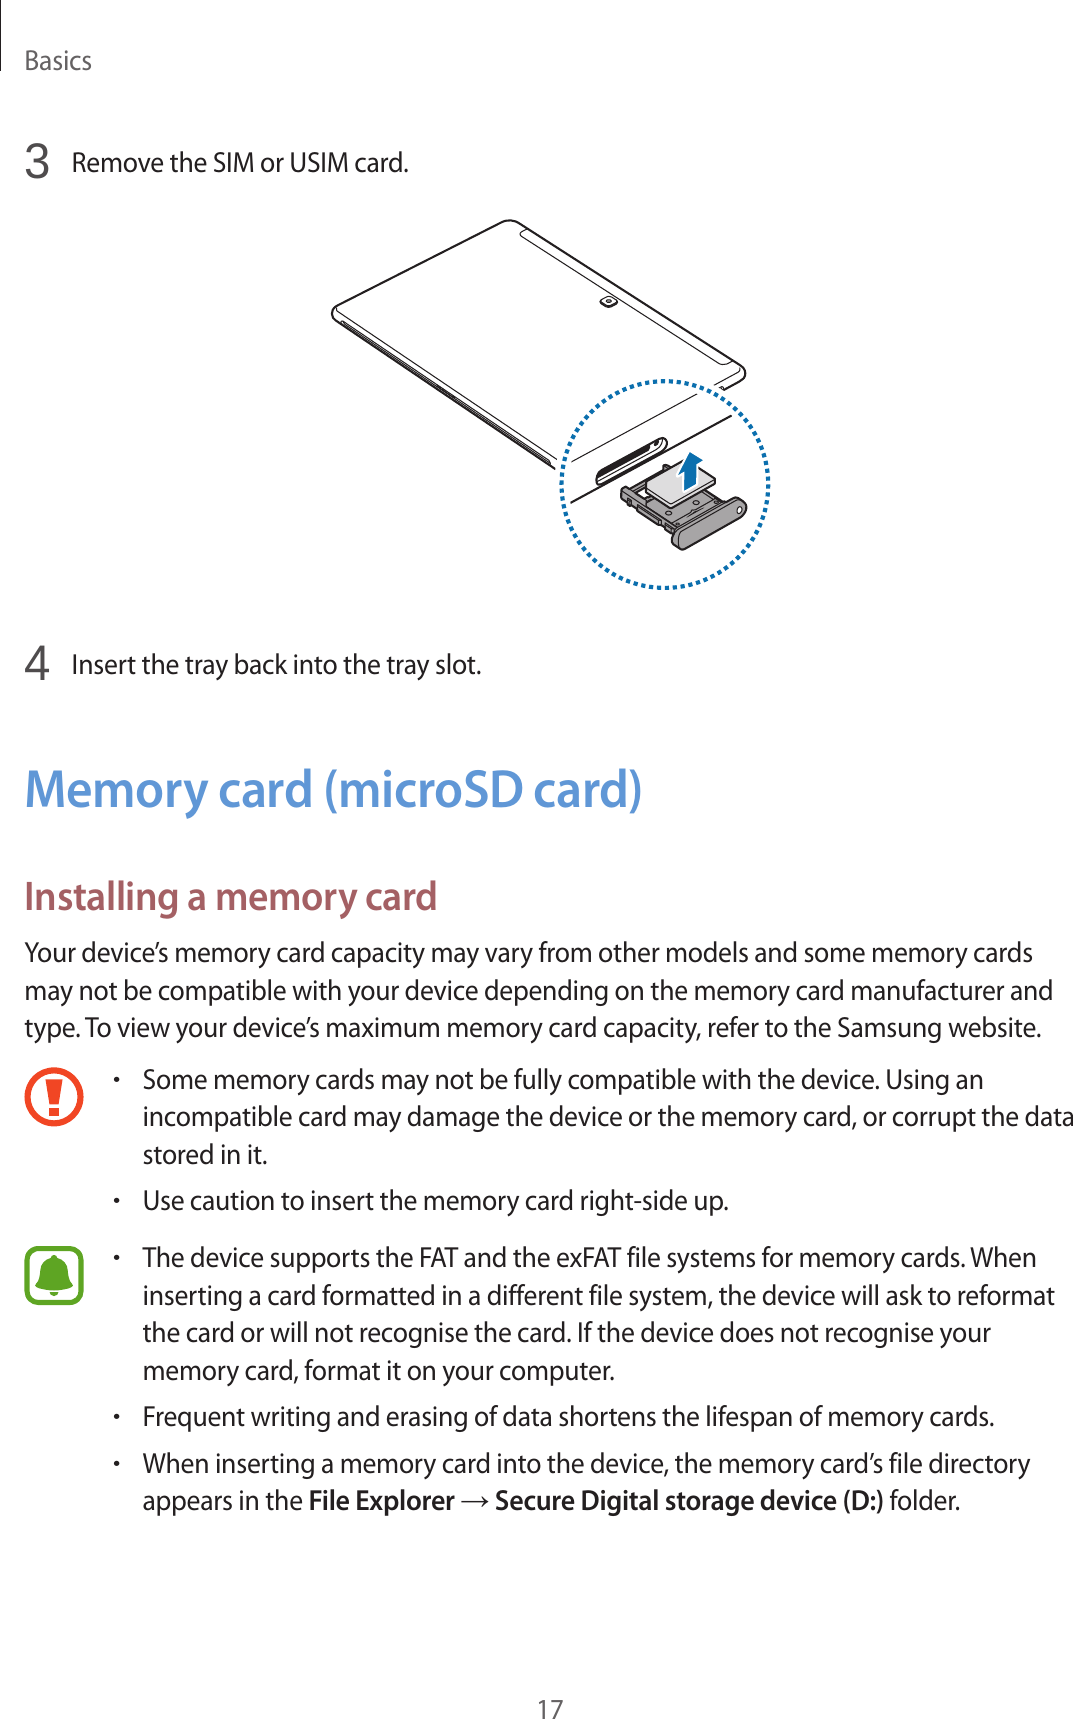 Basics173  Remove the SIM or USIM card.4  Insert the tray back into the tray slot.Memory card (microSD card)Installing a memory cardYour device’s memory card capacity may vary from other models and some memory cards may not be compatible with your device depending on the memory card manufacturer and type. To view your device’s maximum memory card capacity, refer to the Samsung website.•Some memory cards may not be fully compatible with the device. Using an incompatible card may damage the device or the memory card, or corrupt the data stored in it.•Use caution to insert the memory card right-side up.•The device supports the FAT and the exFAT file systems for memory cards. When inserting a card formatted in a different file system, the device will ask to reformat the card or will not recognise the card. If the device does not recognise your memory card, format it on your computer.•Frequent writing and erasing of data shortens the lifespan of memory cards.•When inserting a memory card into the device, the memory card’s file directory appears in the File Explorer → Secure Digital storage device (D:) folder.